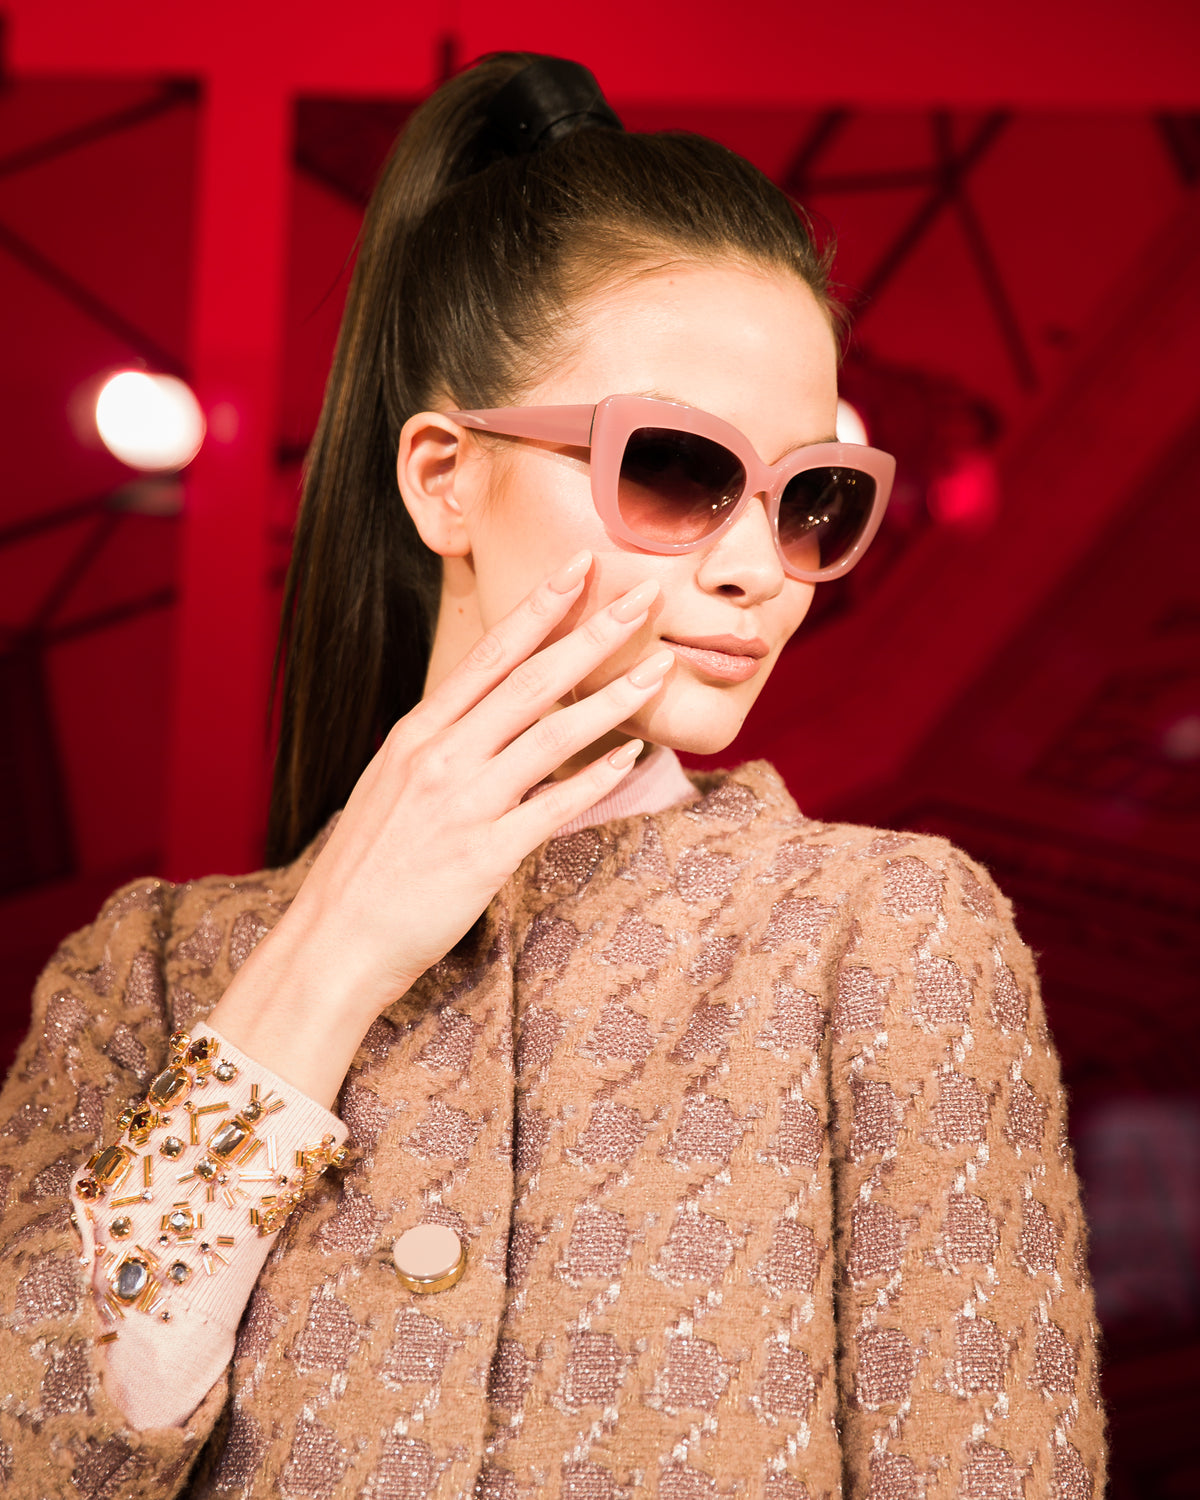 Female model holding her hand to her face with Deborah Lippmann nail polish on